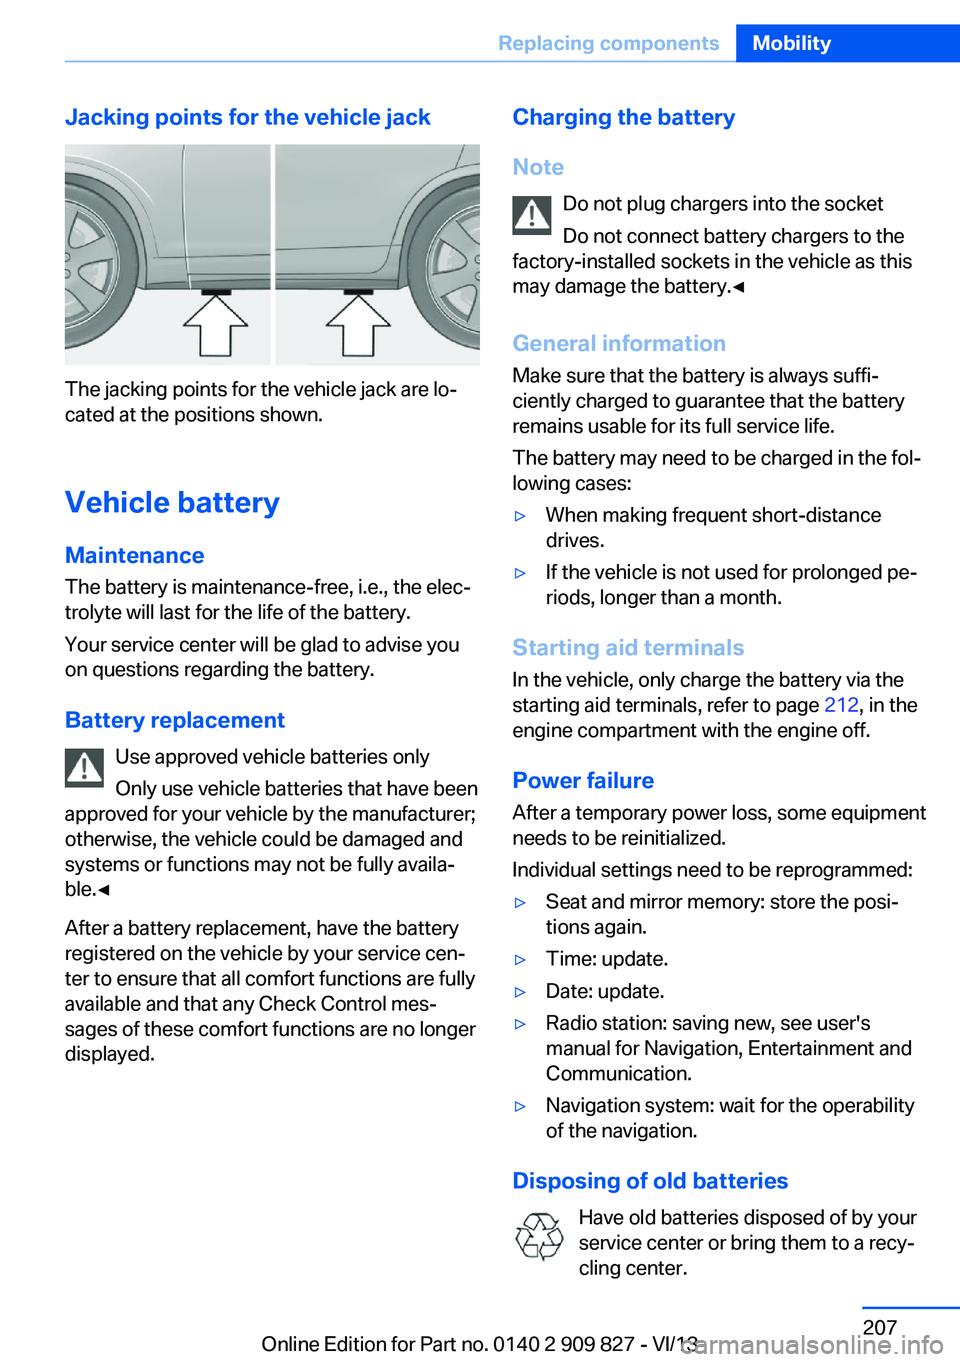 BMW 435I COUPE 2014  Owners Manual Jacking points for the vehicle jack
The jacking points for the vehicle jack are lo‐
cated at the positions shown.
Vehicle battery Maintenance
The battery is maintenance-free, i.e., the elec‐
troly